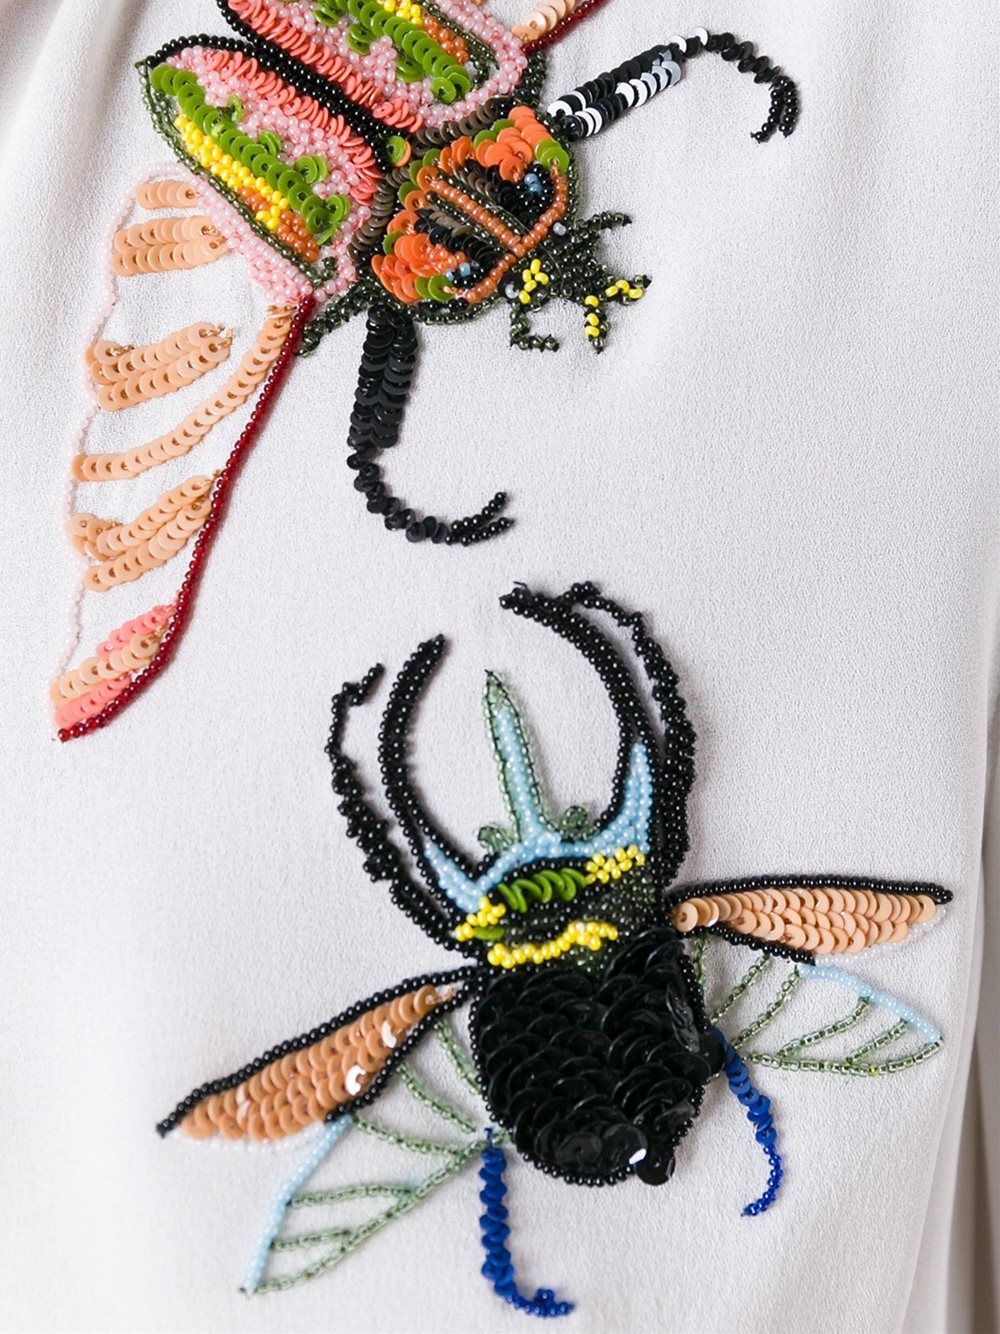 Alexander McQueen embellished insect shirt